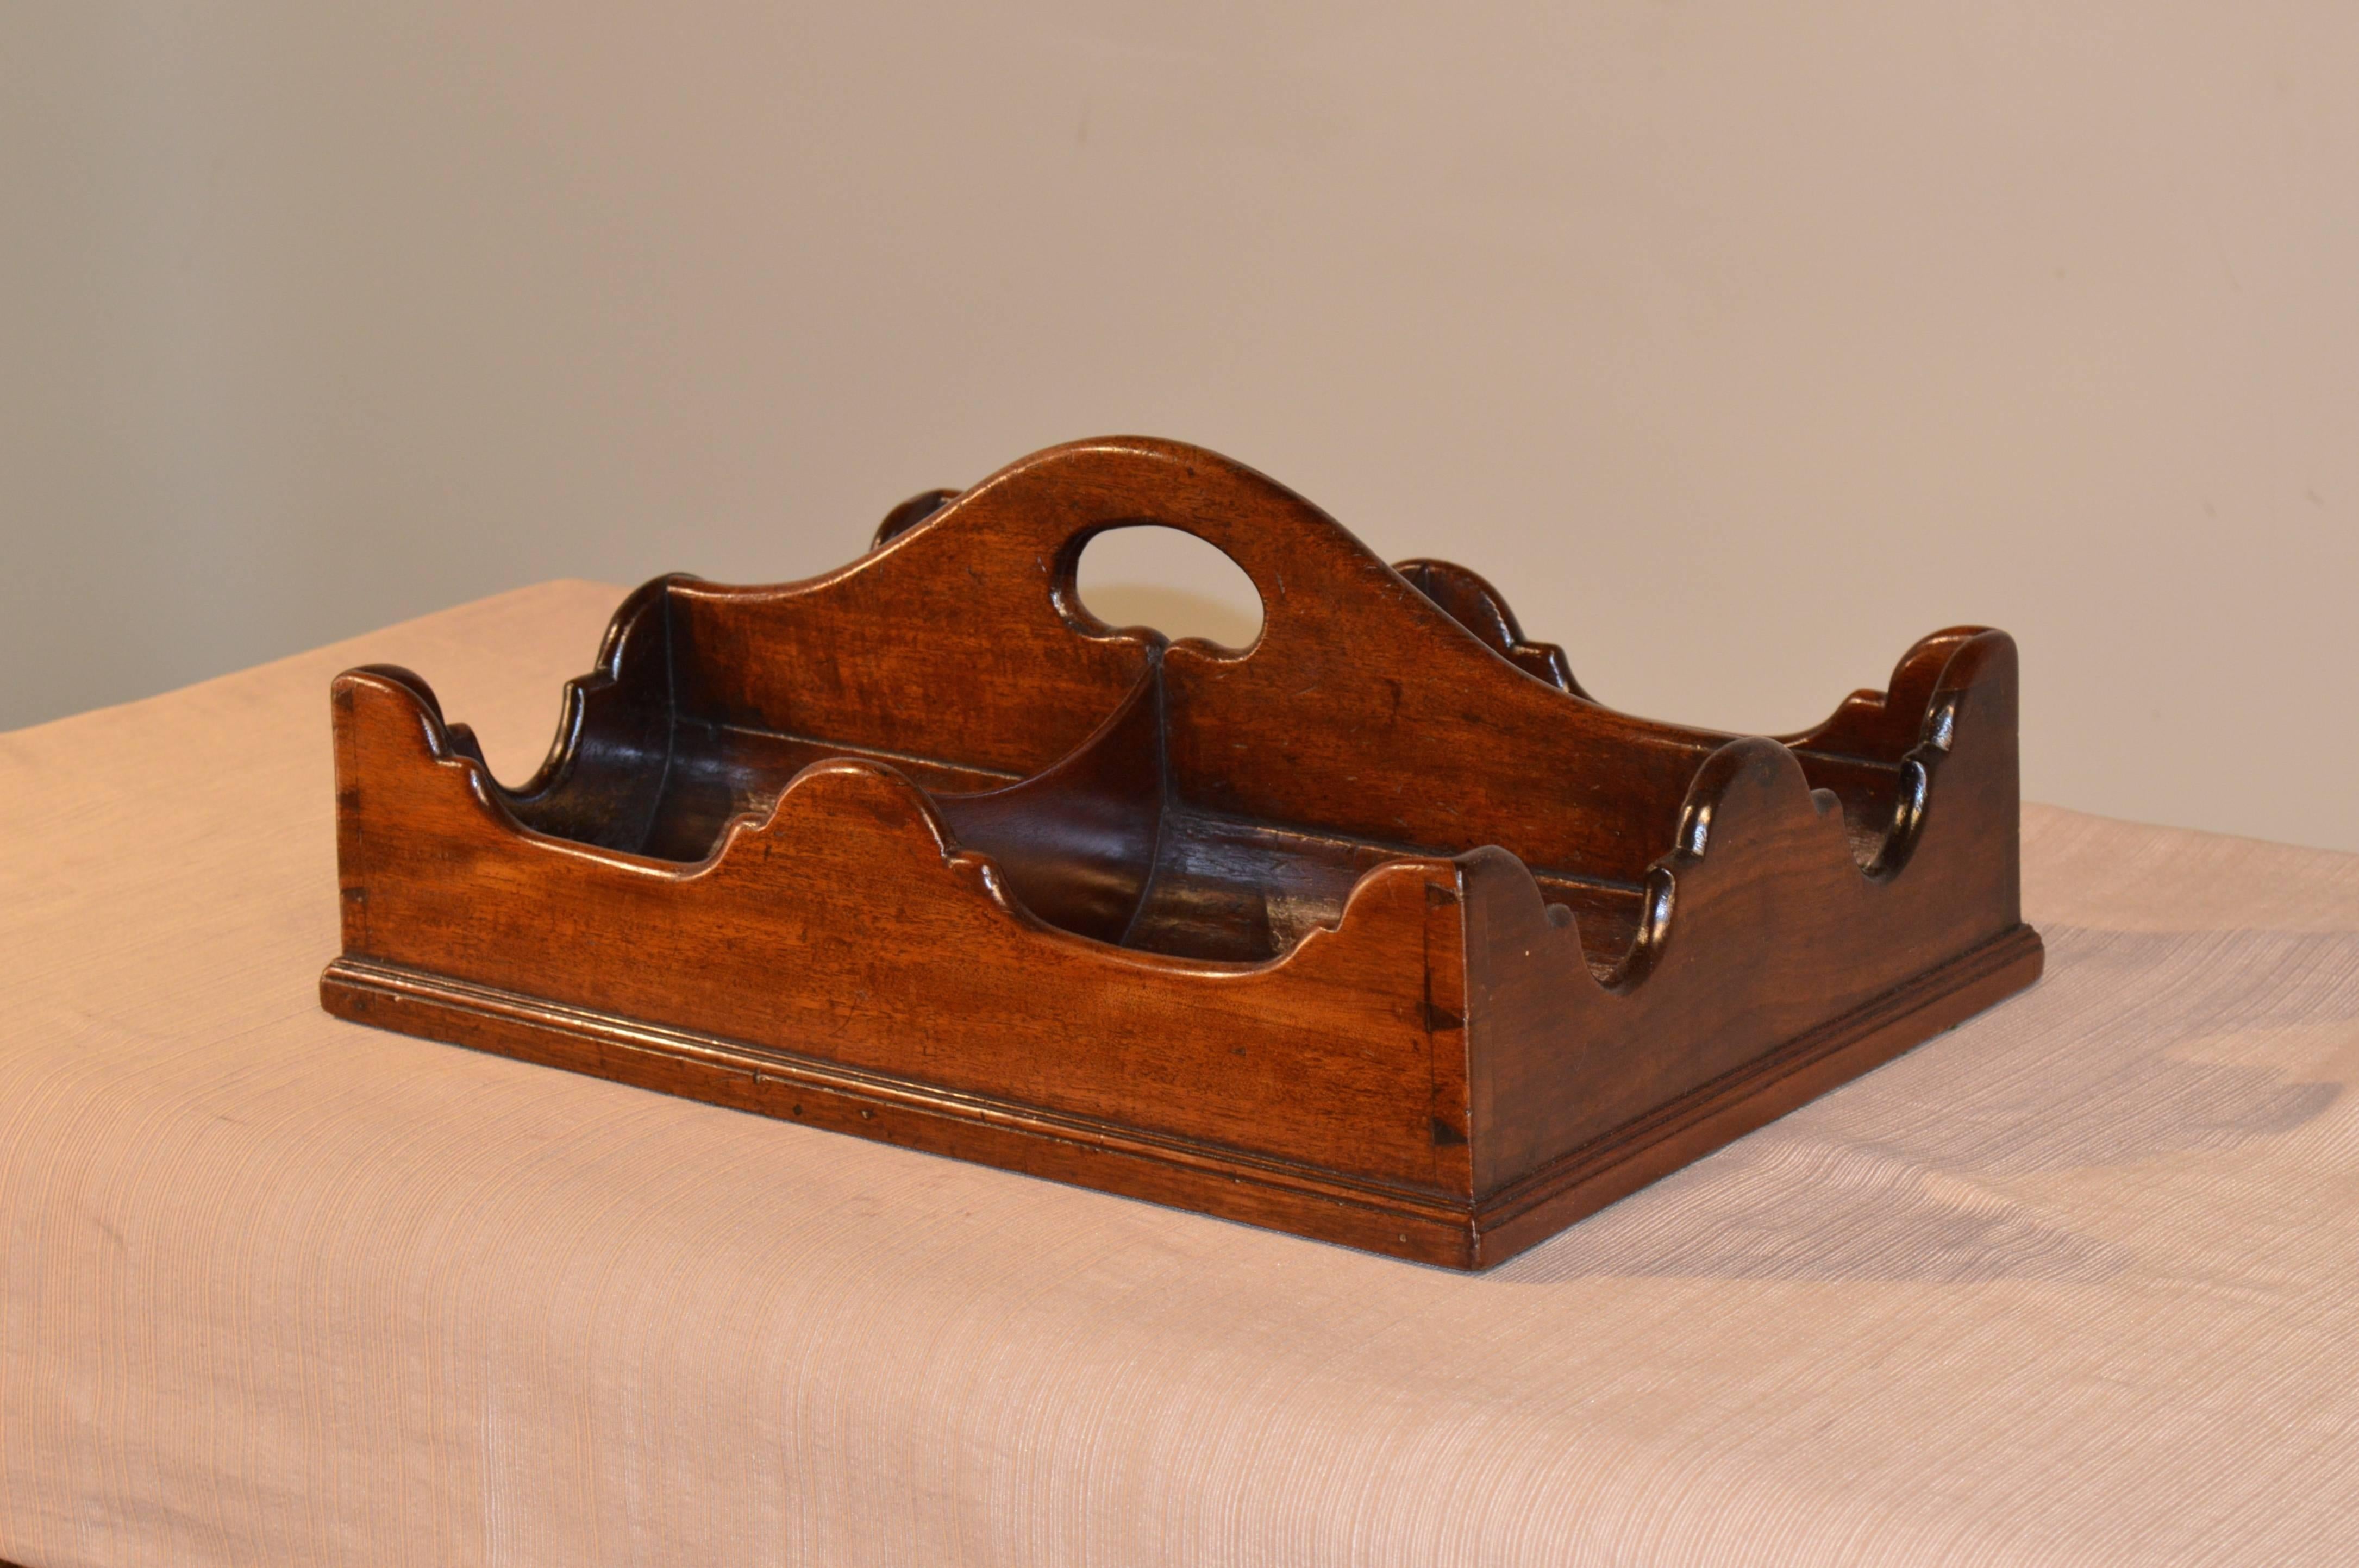 Period George III mahogany wine caddy with four bottle sections. The sides are beautifully scalloped and constructed with dovetails. The bottom is beautifully molded. A rare Georgian treasure.